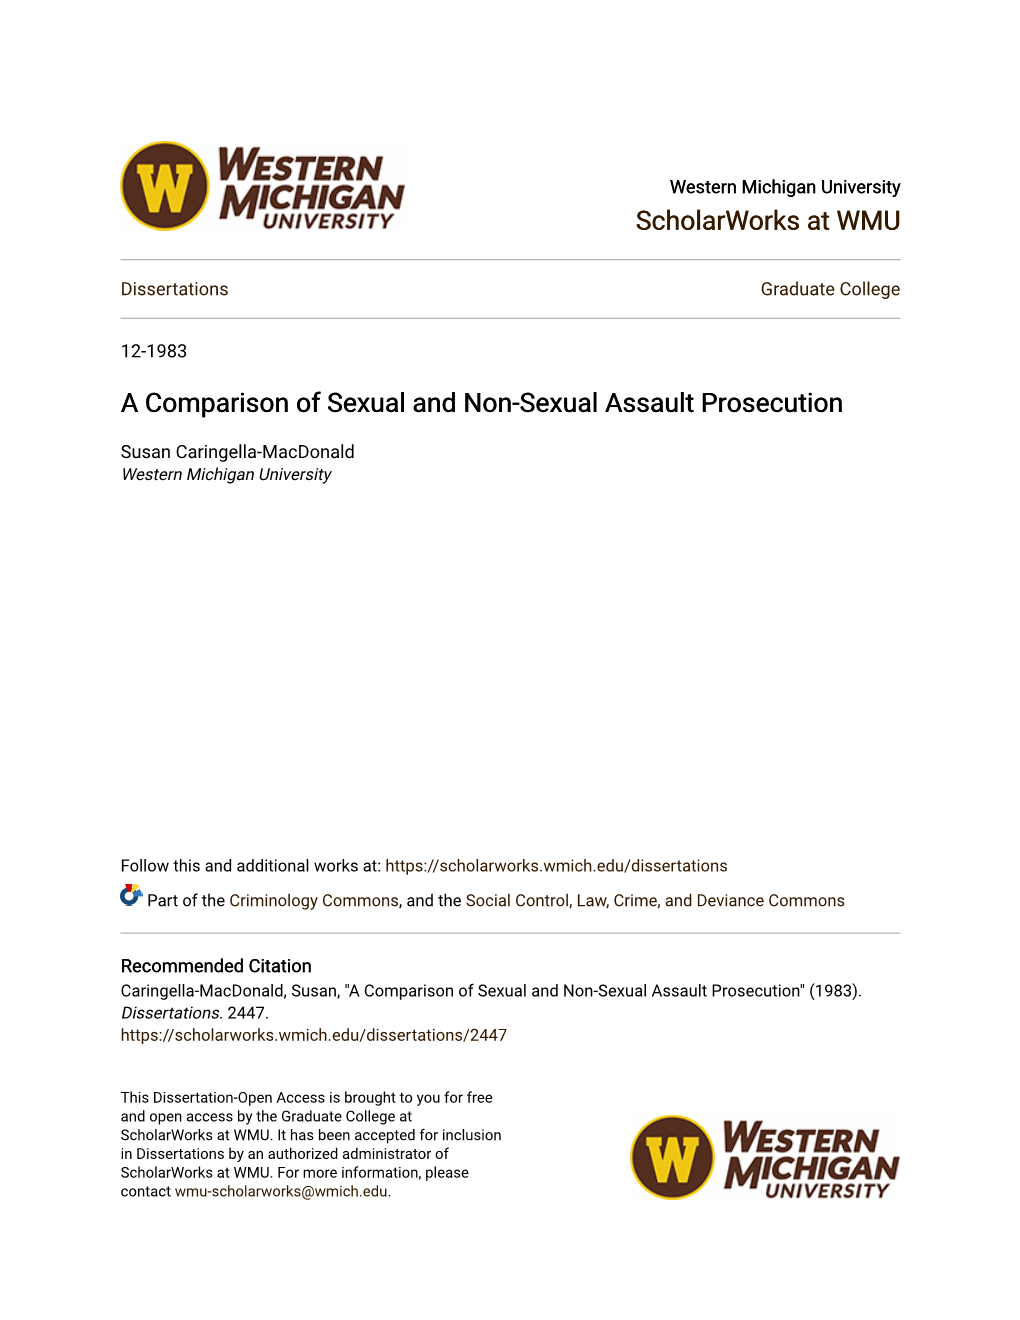 A Comparison of Sexual and Non-Sexual Assault Prosecution